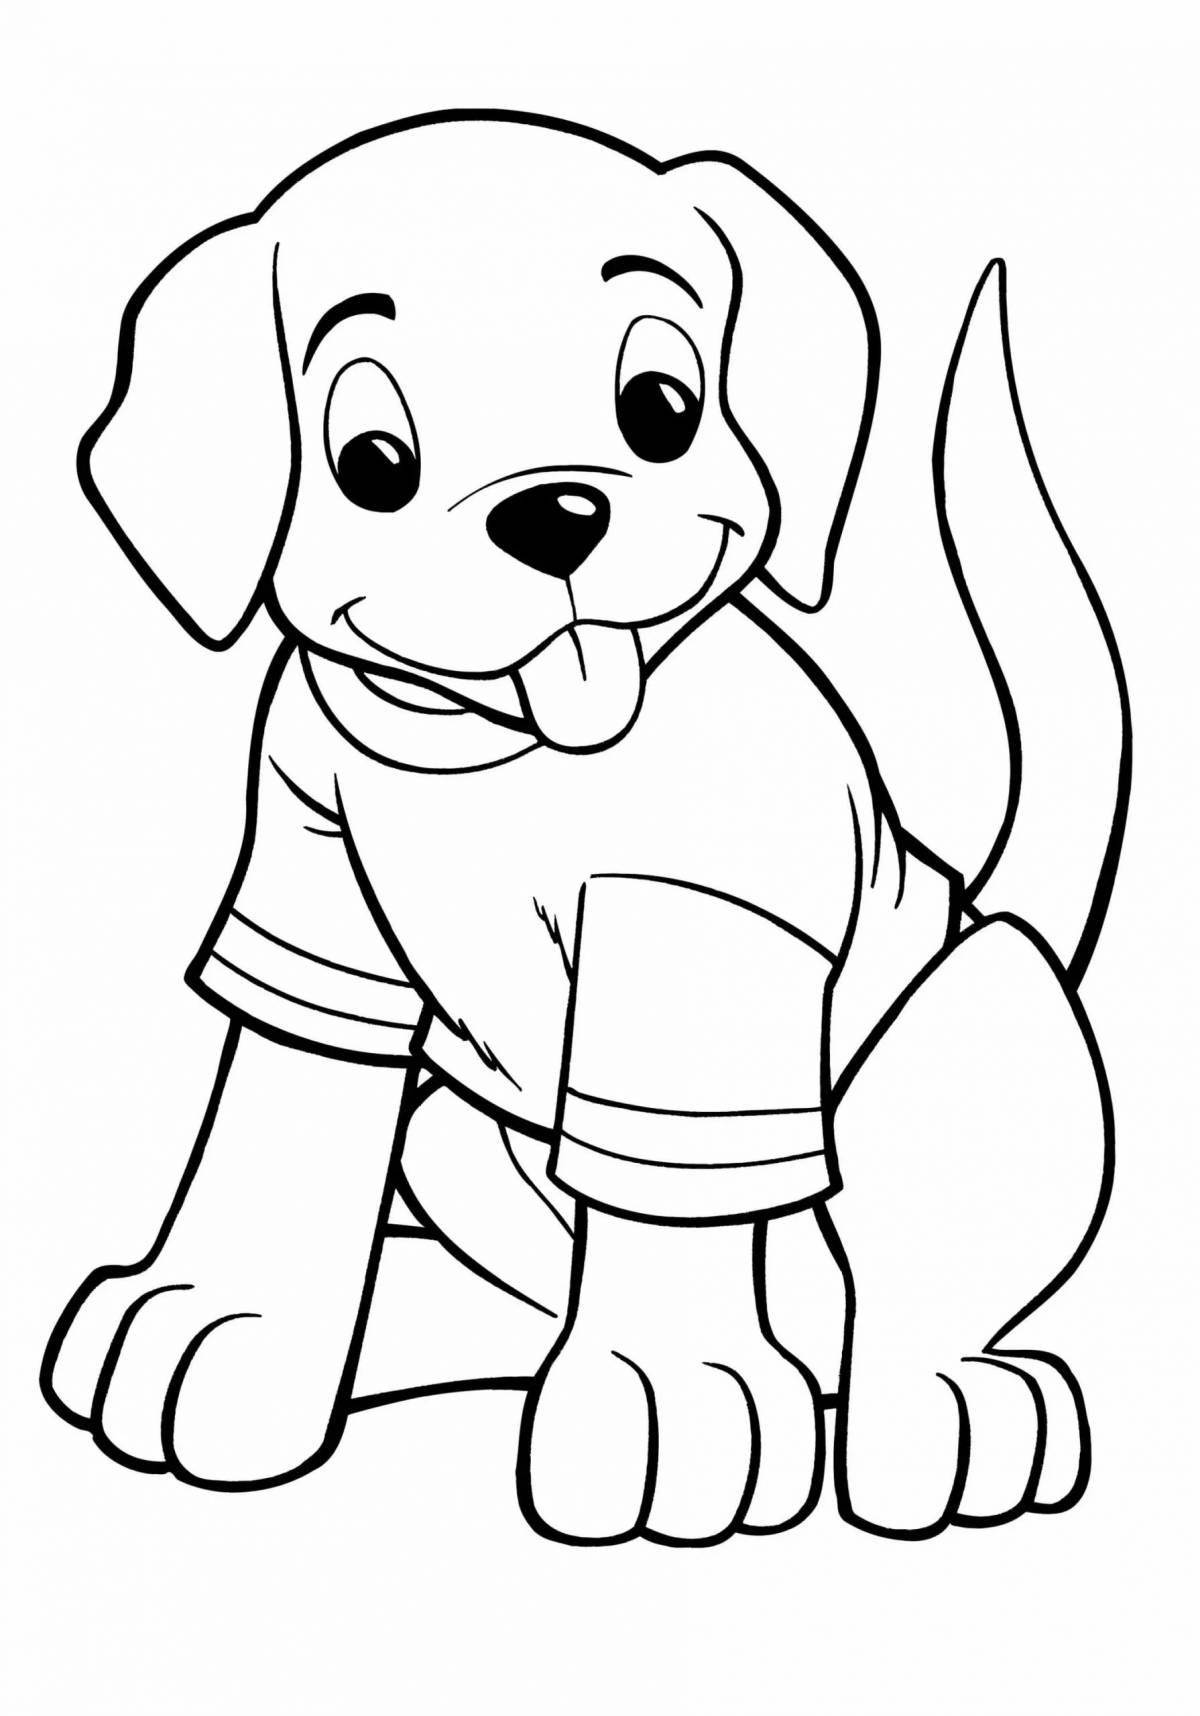 Puppy wiggly coloring page for kids